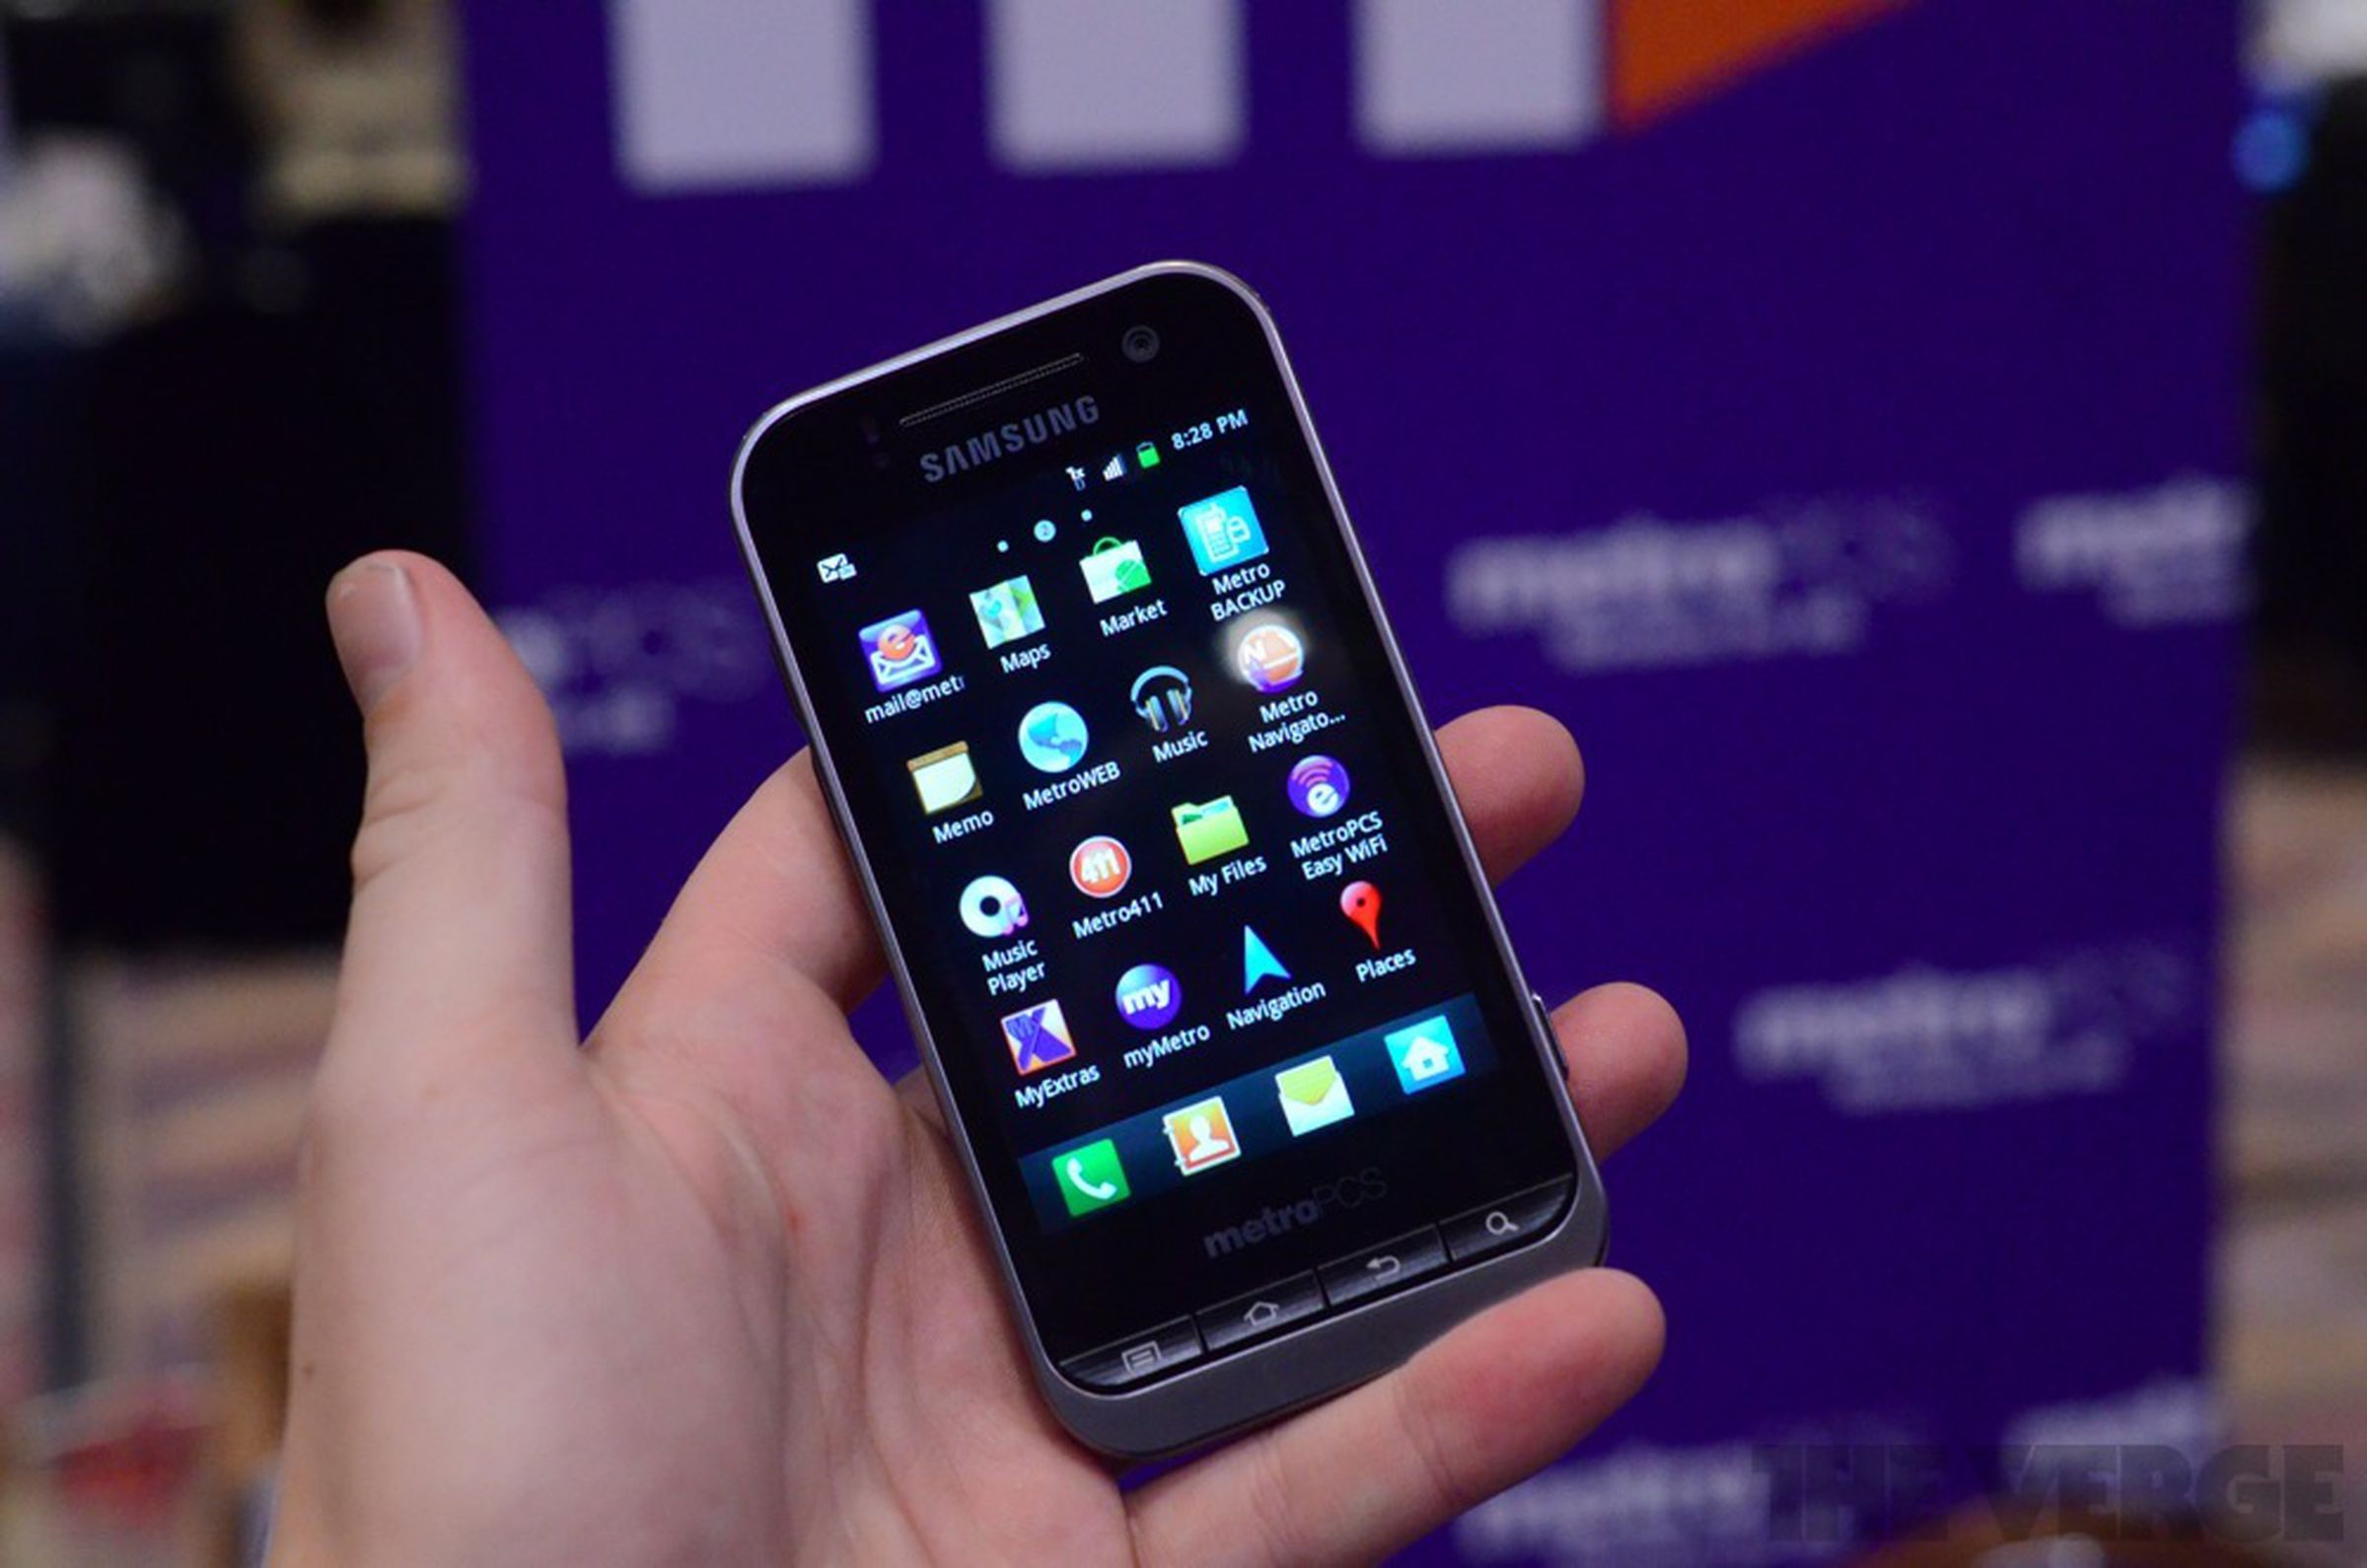 Samsung Galaxy Attain 4G, LG Connect 4G, Dyle TV hands-on